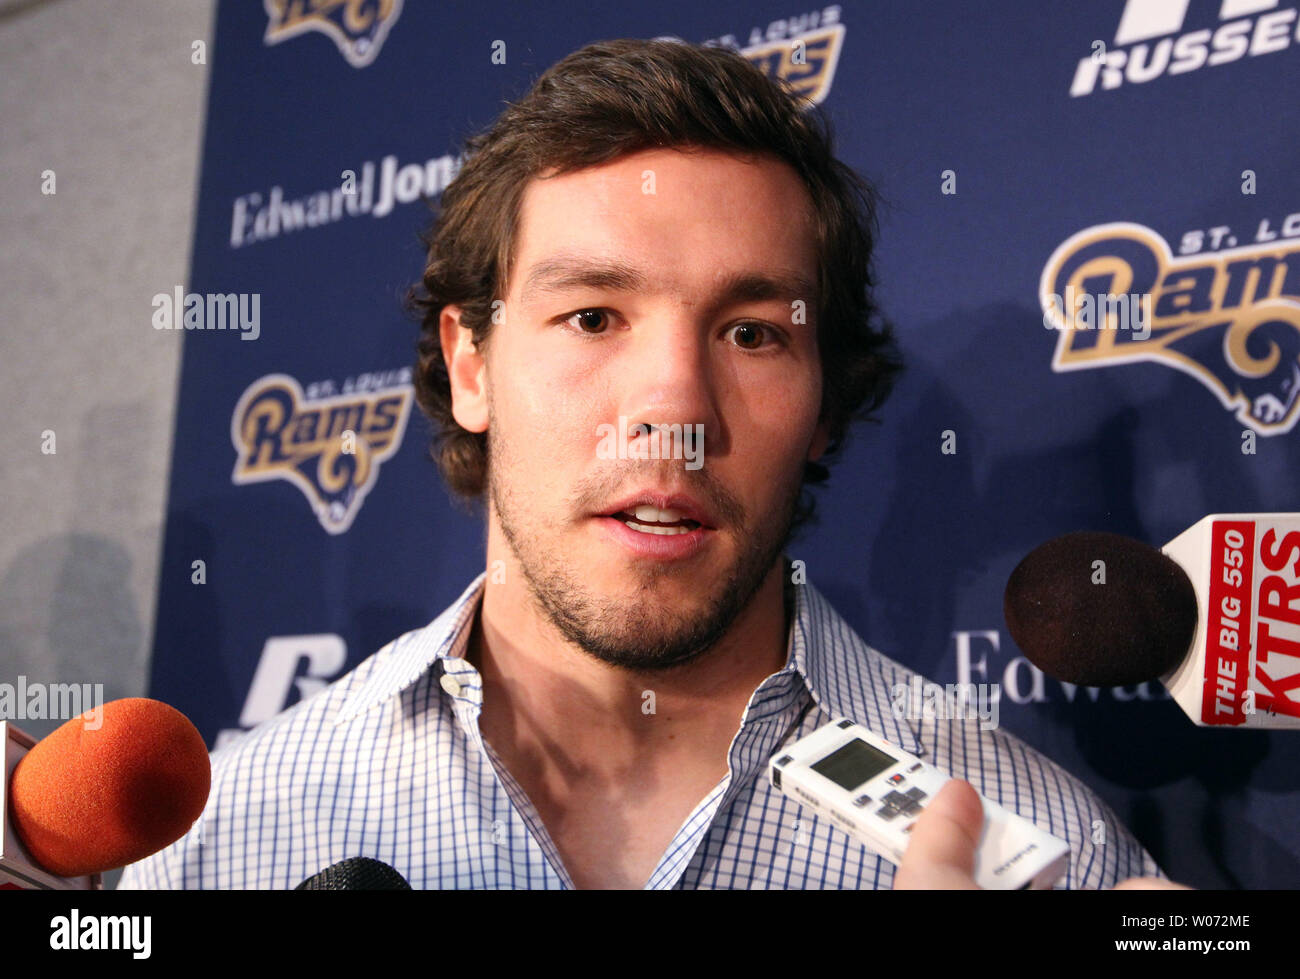 St. Louis Rams quarterback Sam Bradford talks to reporters after new head coach Jeff Fisher was introduced at the team's practice facility in Earth City, Missouri on January 17, 2012.   UPI/Bill Greenblatt Stock Photo